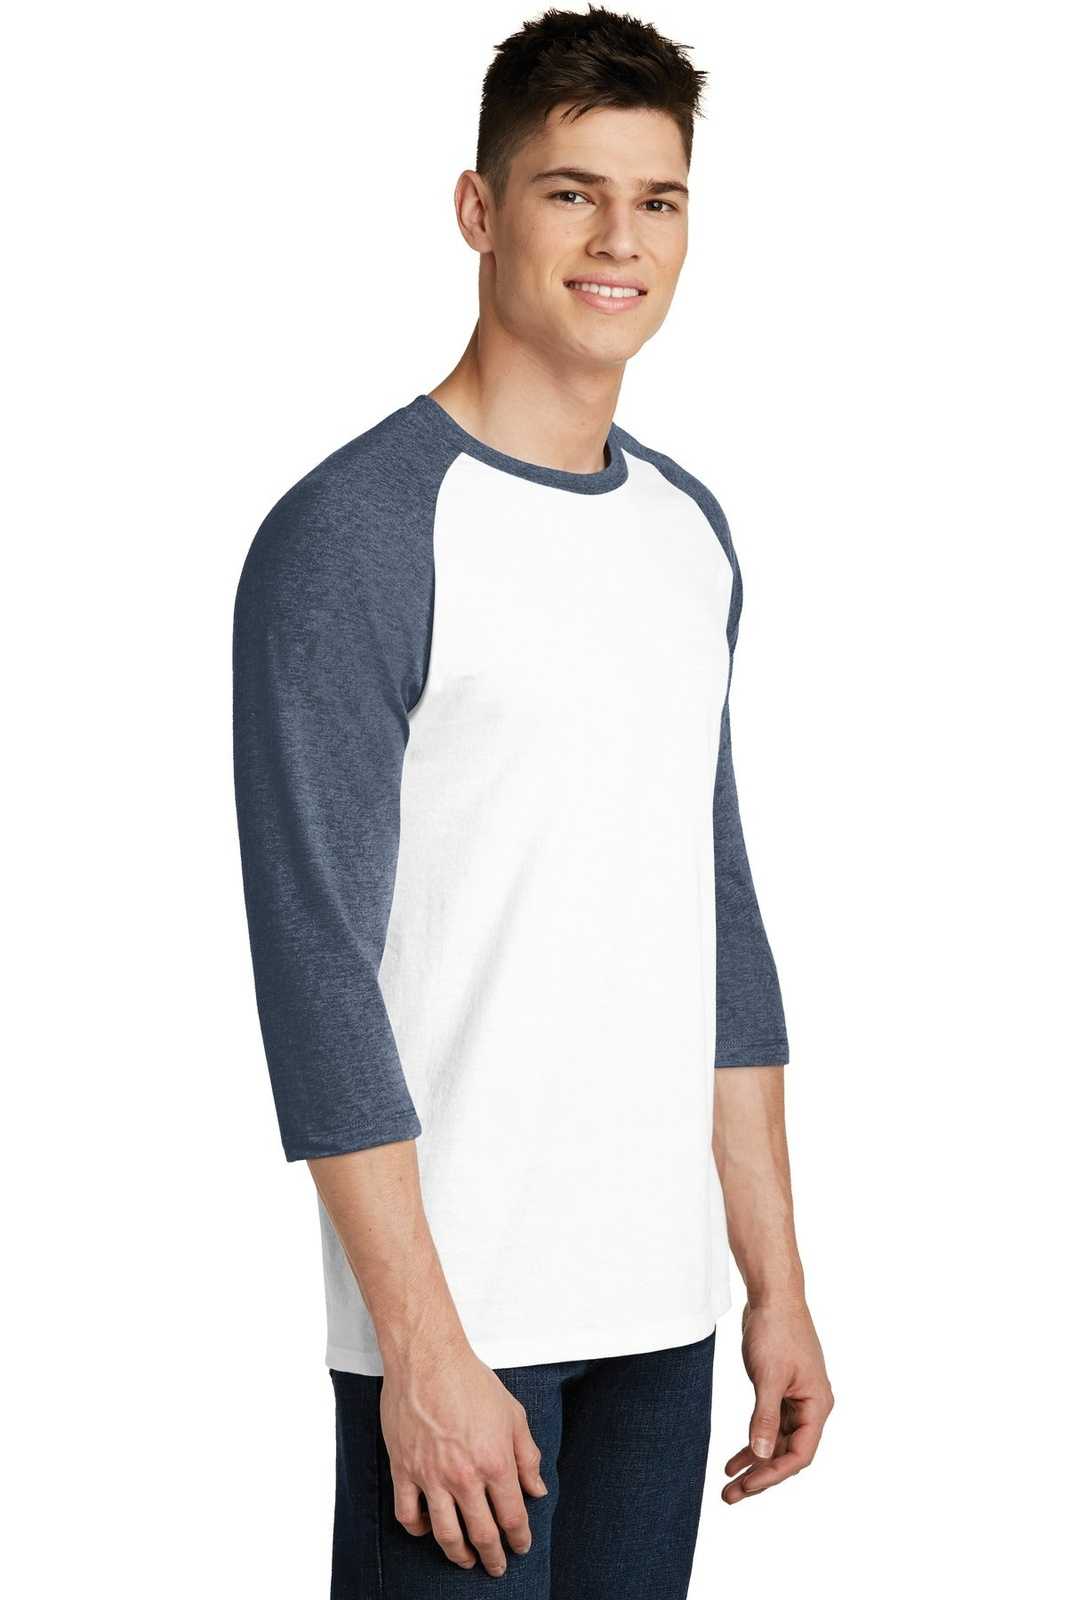 District DT6210 Very Important Tee 3/4-Sleeve Raglan - Heathered Navy White - HIT a Double - 4